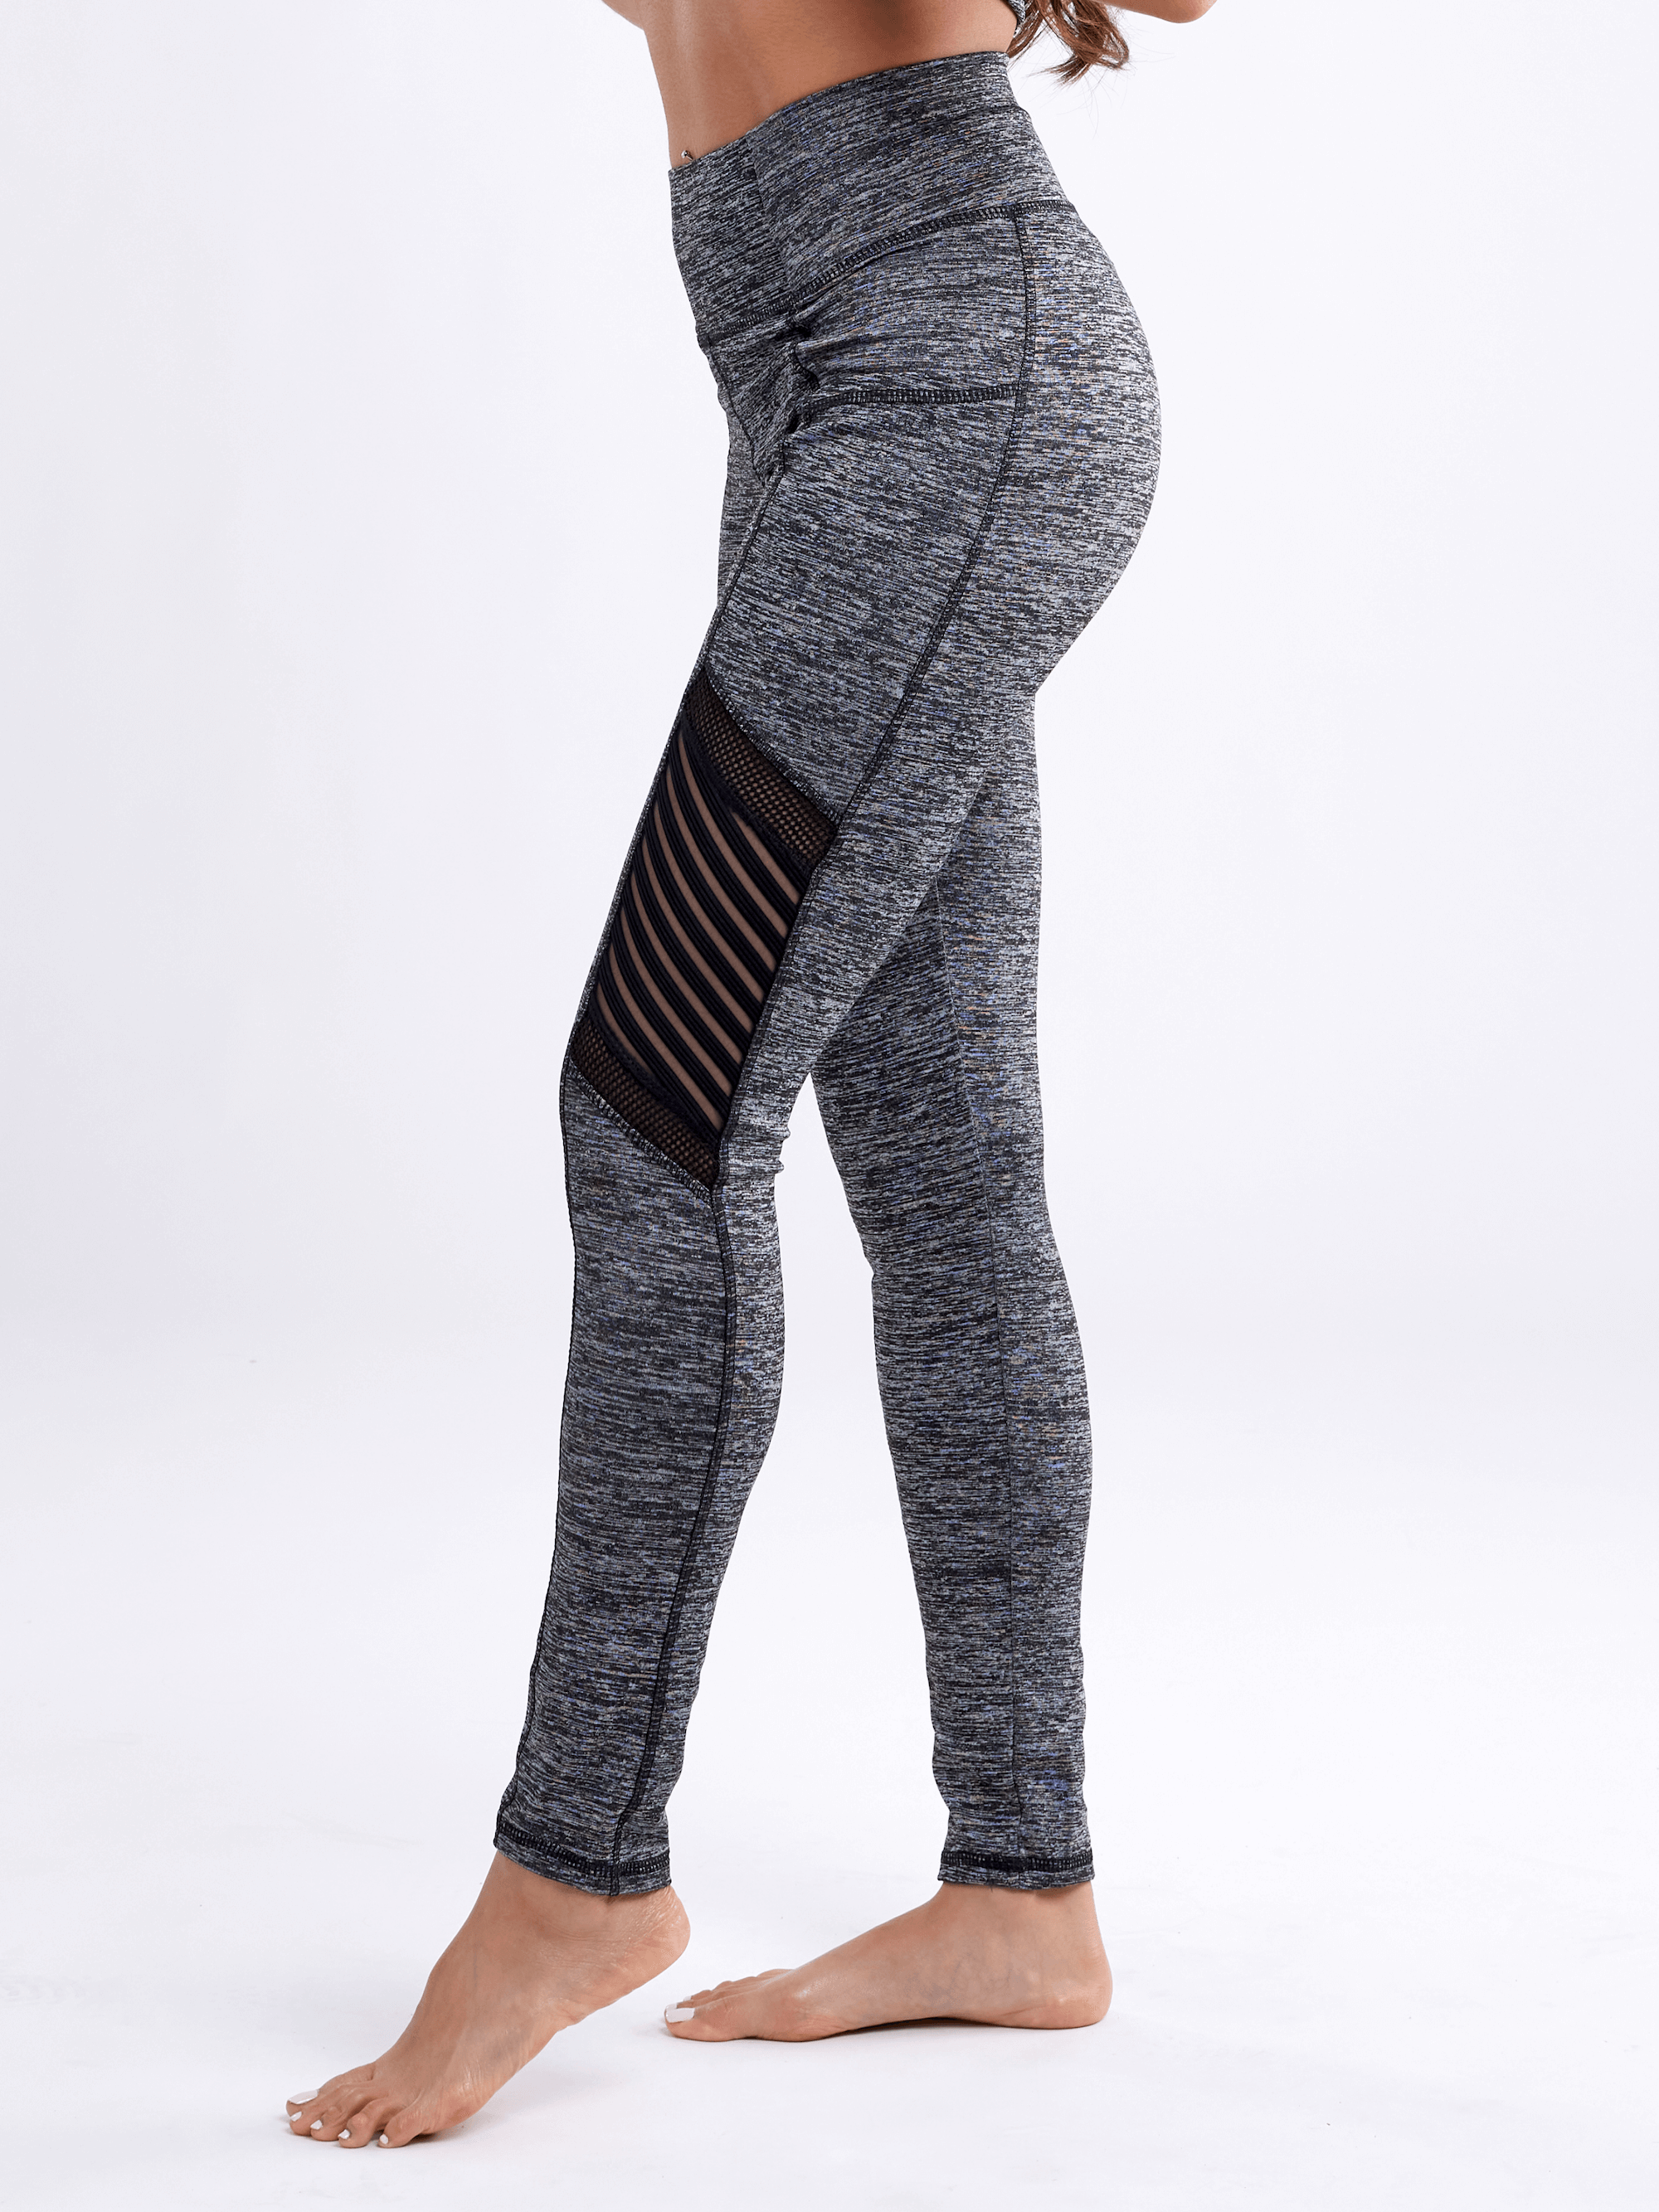 Athletique Low-Waisted Ribbed Leggings With Hidden Pocket and Mesh